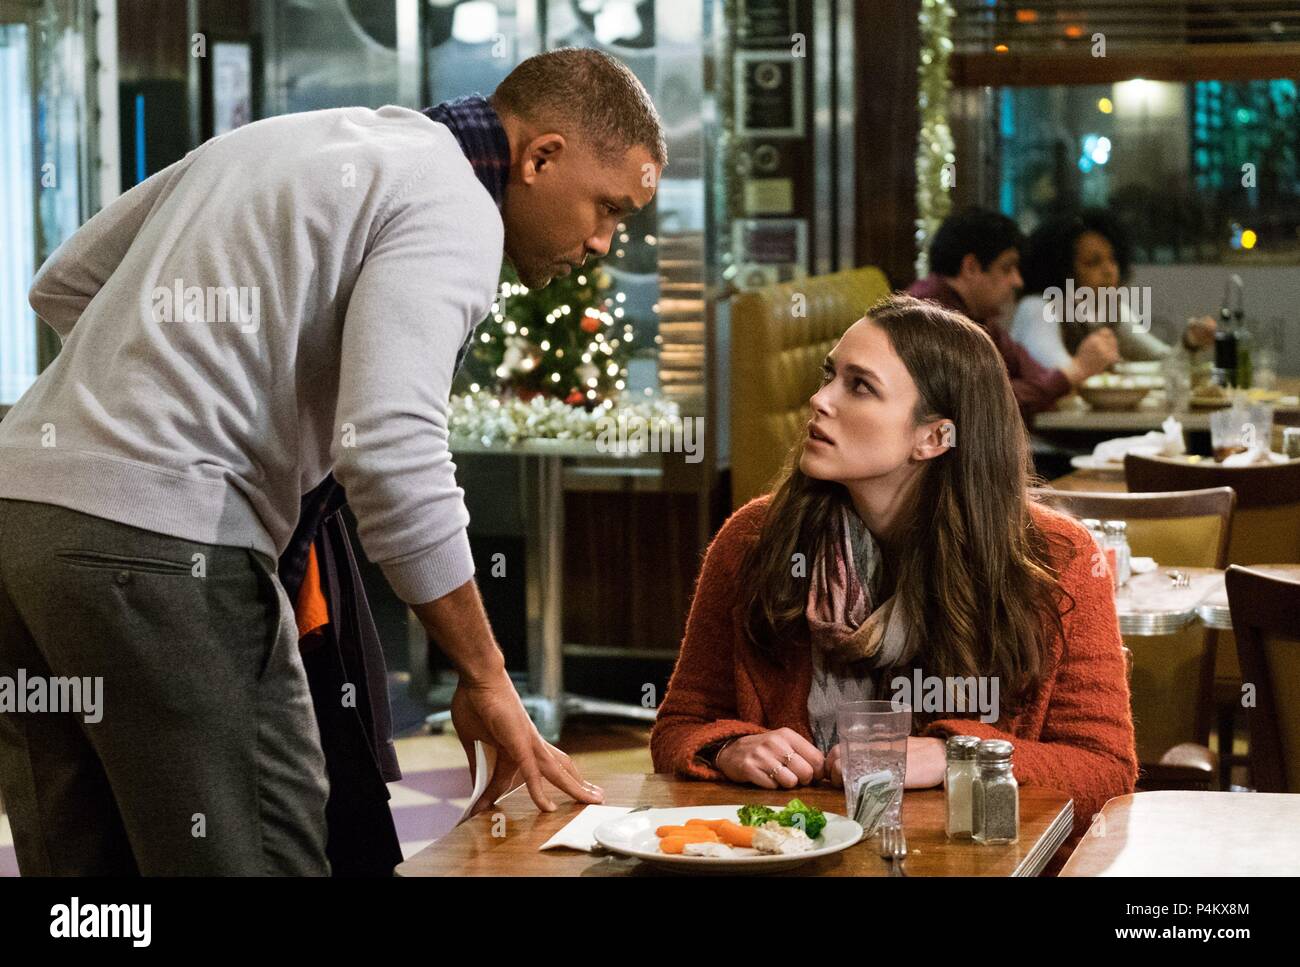 Original Film Title: COLLATERAL BEAUTY.  English Title: COLLATERAL BEAUTY.  Film Director: DAVID FRANKEL.  Year: 2016.  Stars: WILL SMITH; KEIRA KNIGHTLEY. Credit: PALMSTAR MEDIA/LIKELY STORY/ANONIMOUS CONTENT/OVERBOOK ENT/ / WETCHER, BARRY / Album Stock Photo